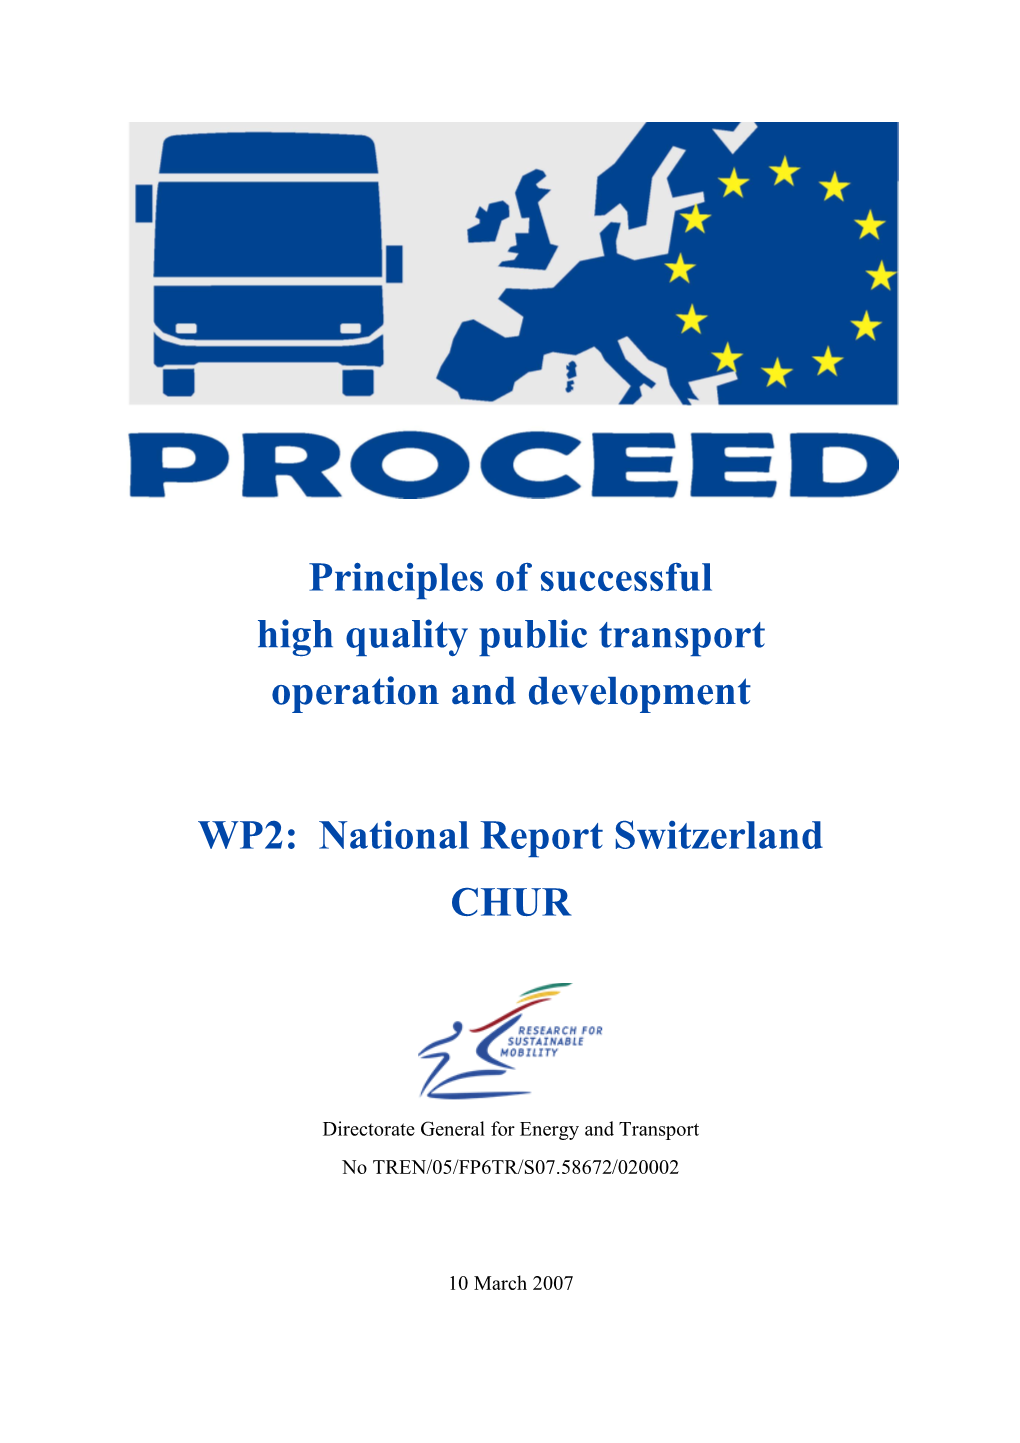 Principles of Successful High Quality Public Transport Operation and Development